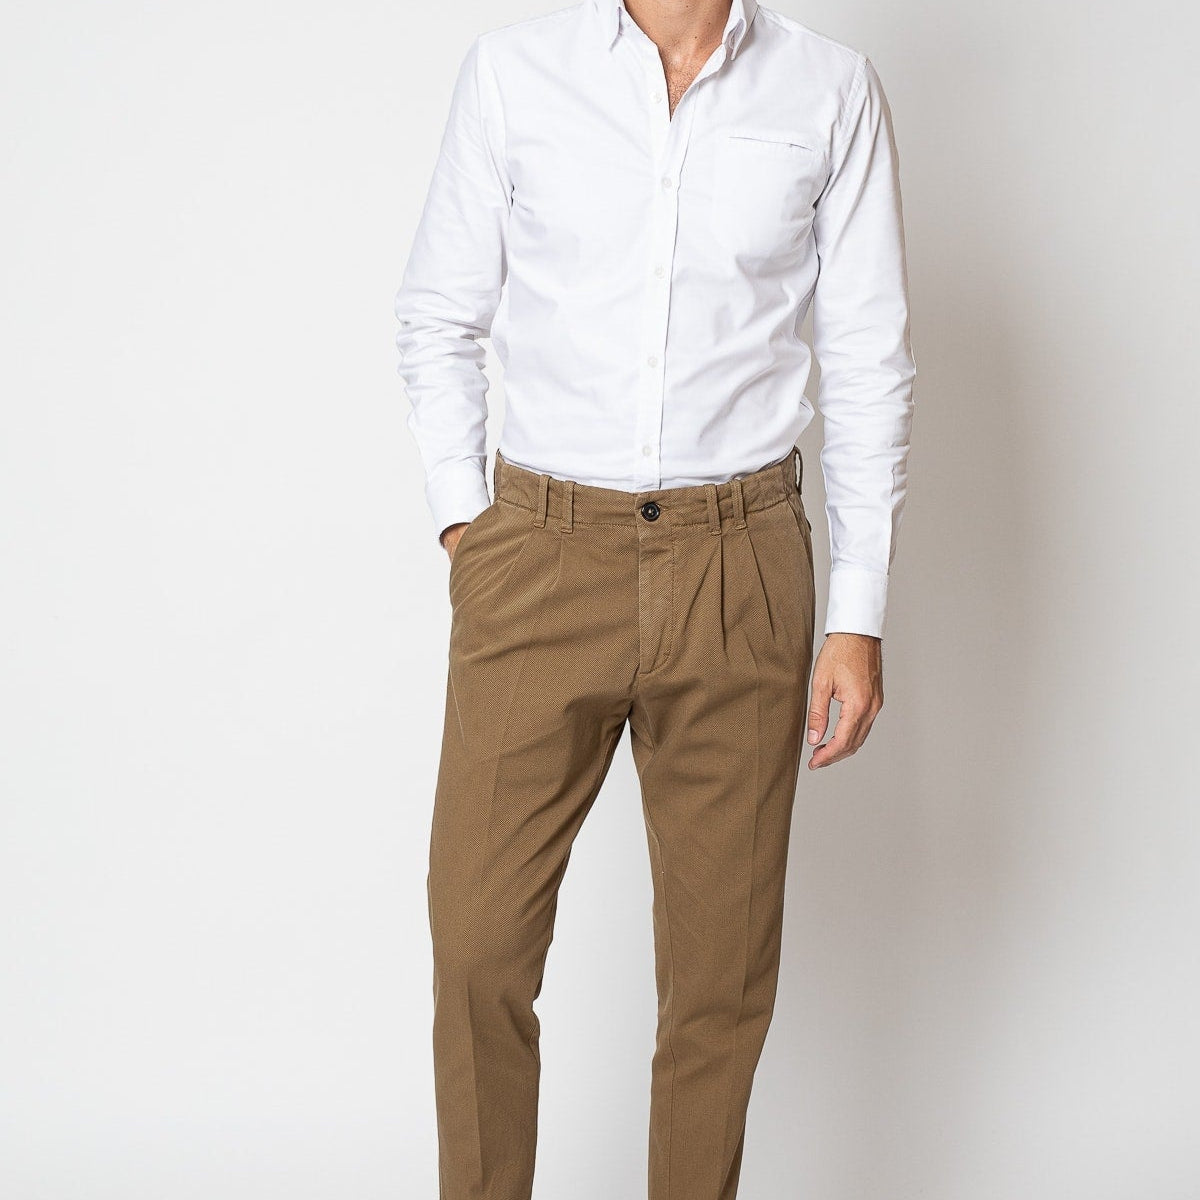 Jaqk - Brown Trousers - Closer - The Good Chic